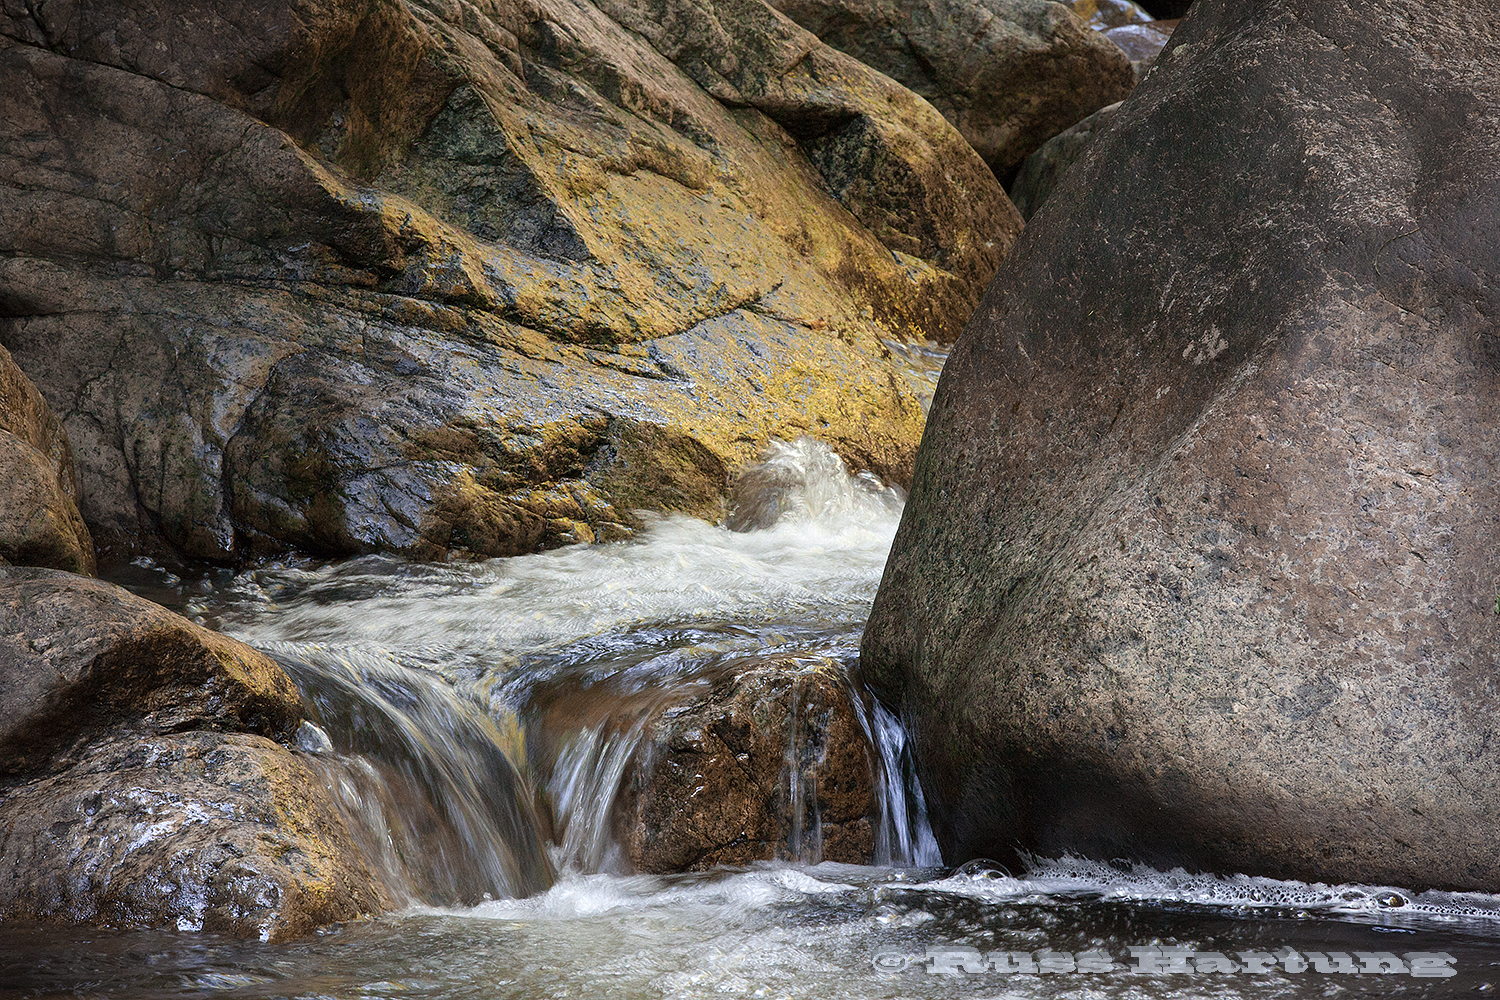 "Cascade and Boulders Along the Roaring Brook Trail" Published in ADK Mtn Club 2020 calendar